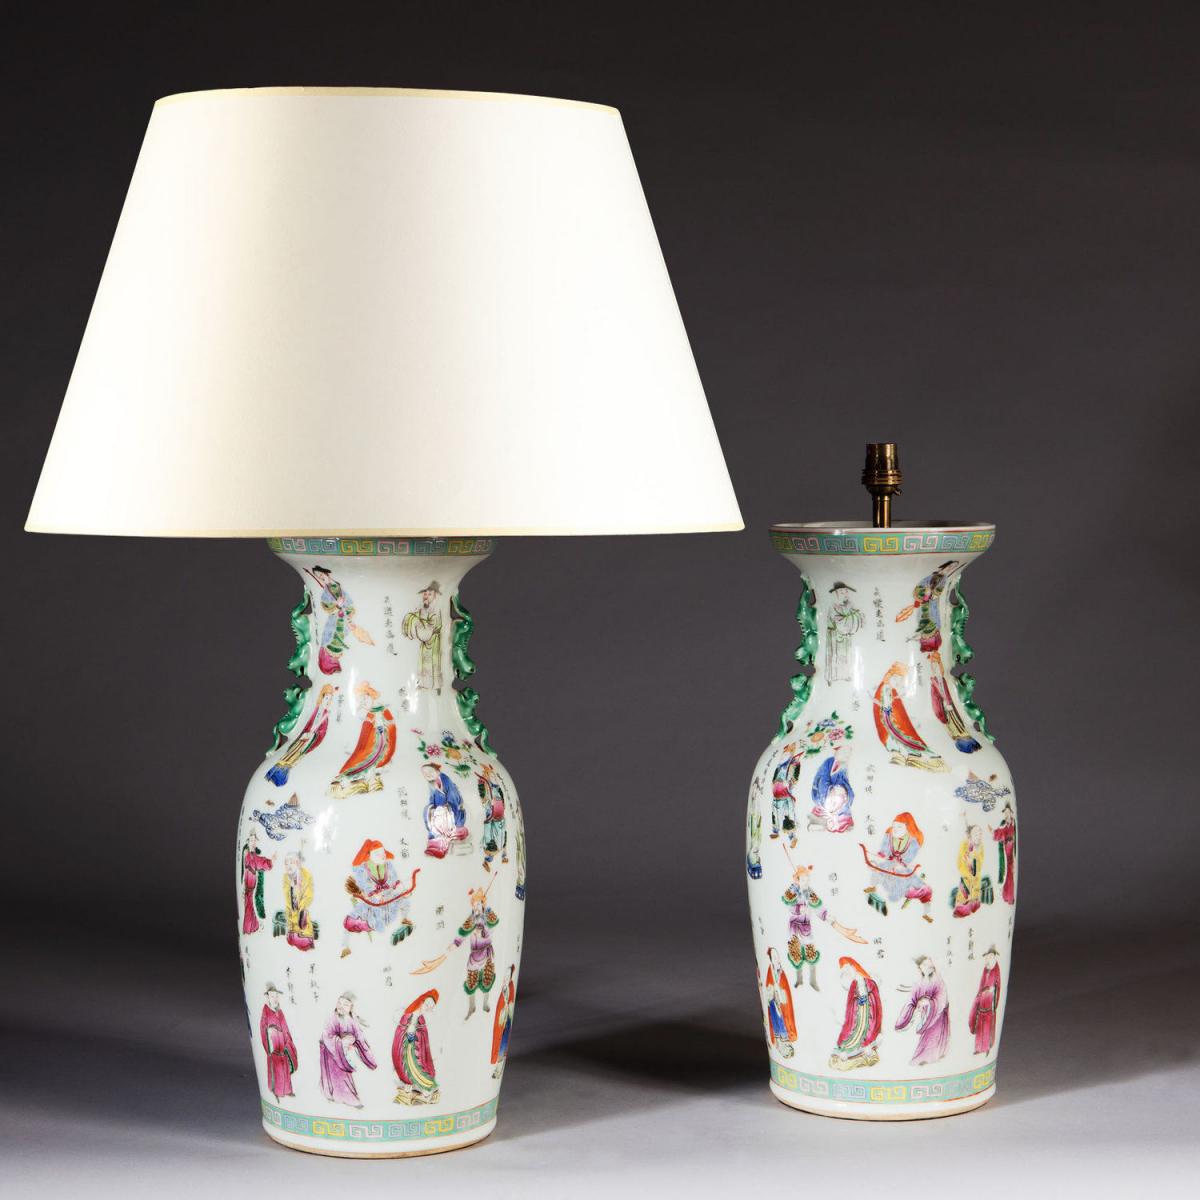 A Pair of Mid 19th Century Chinese Polychrome Vases